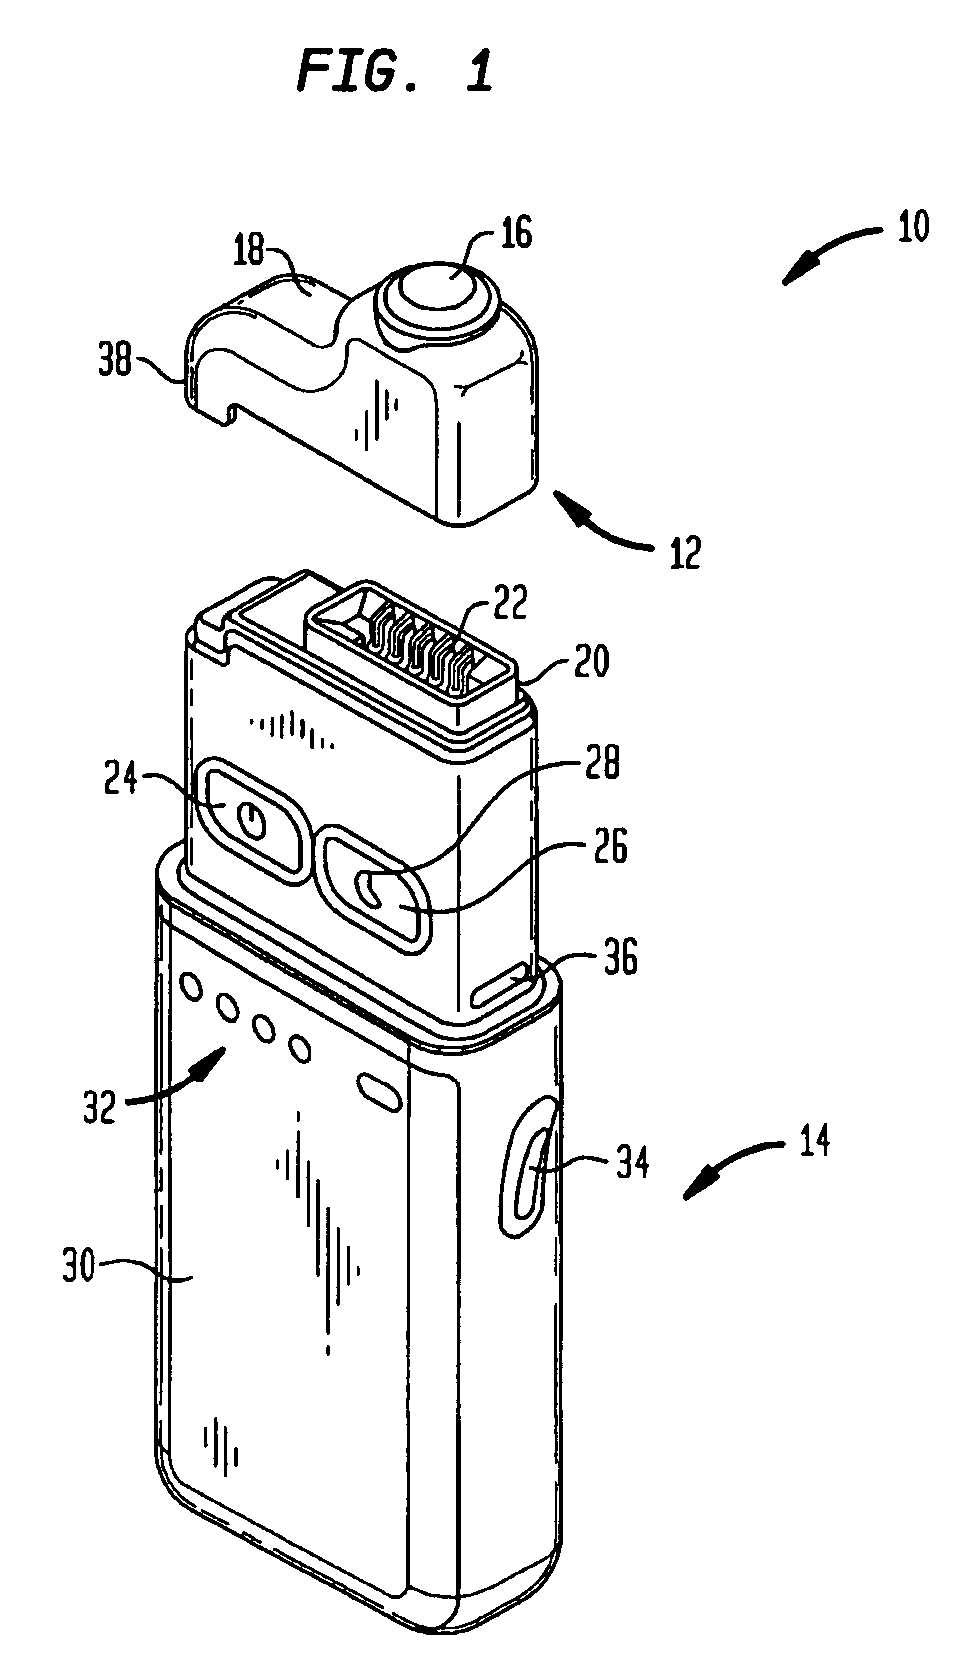 Treatment device and method for treating skin lesions through application of heat